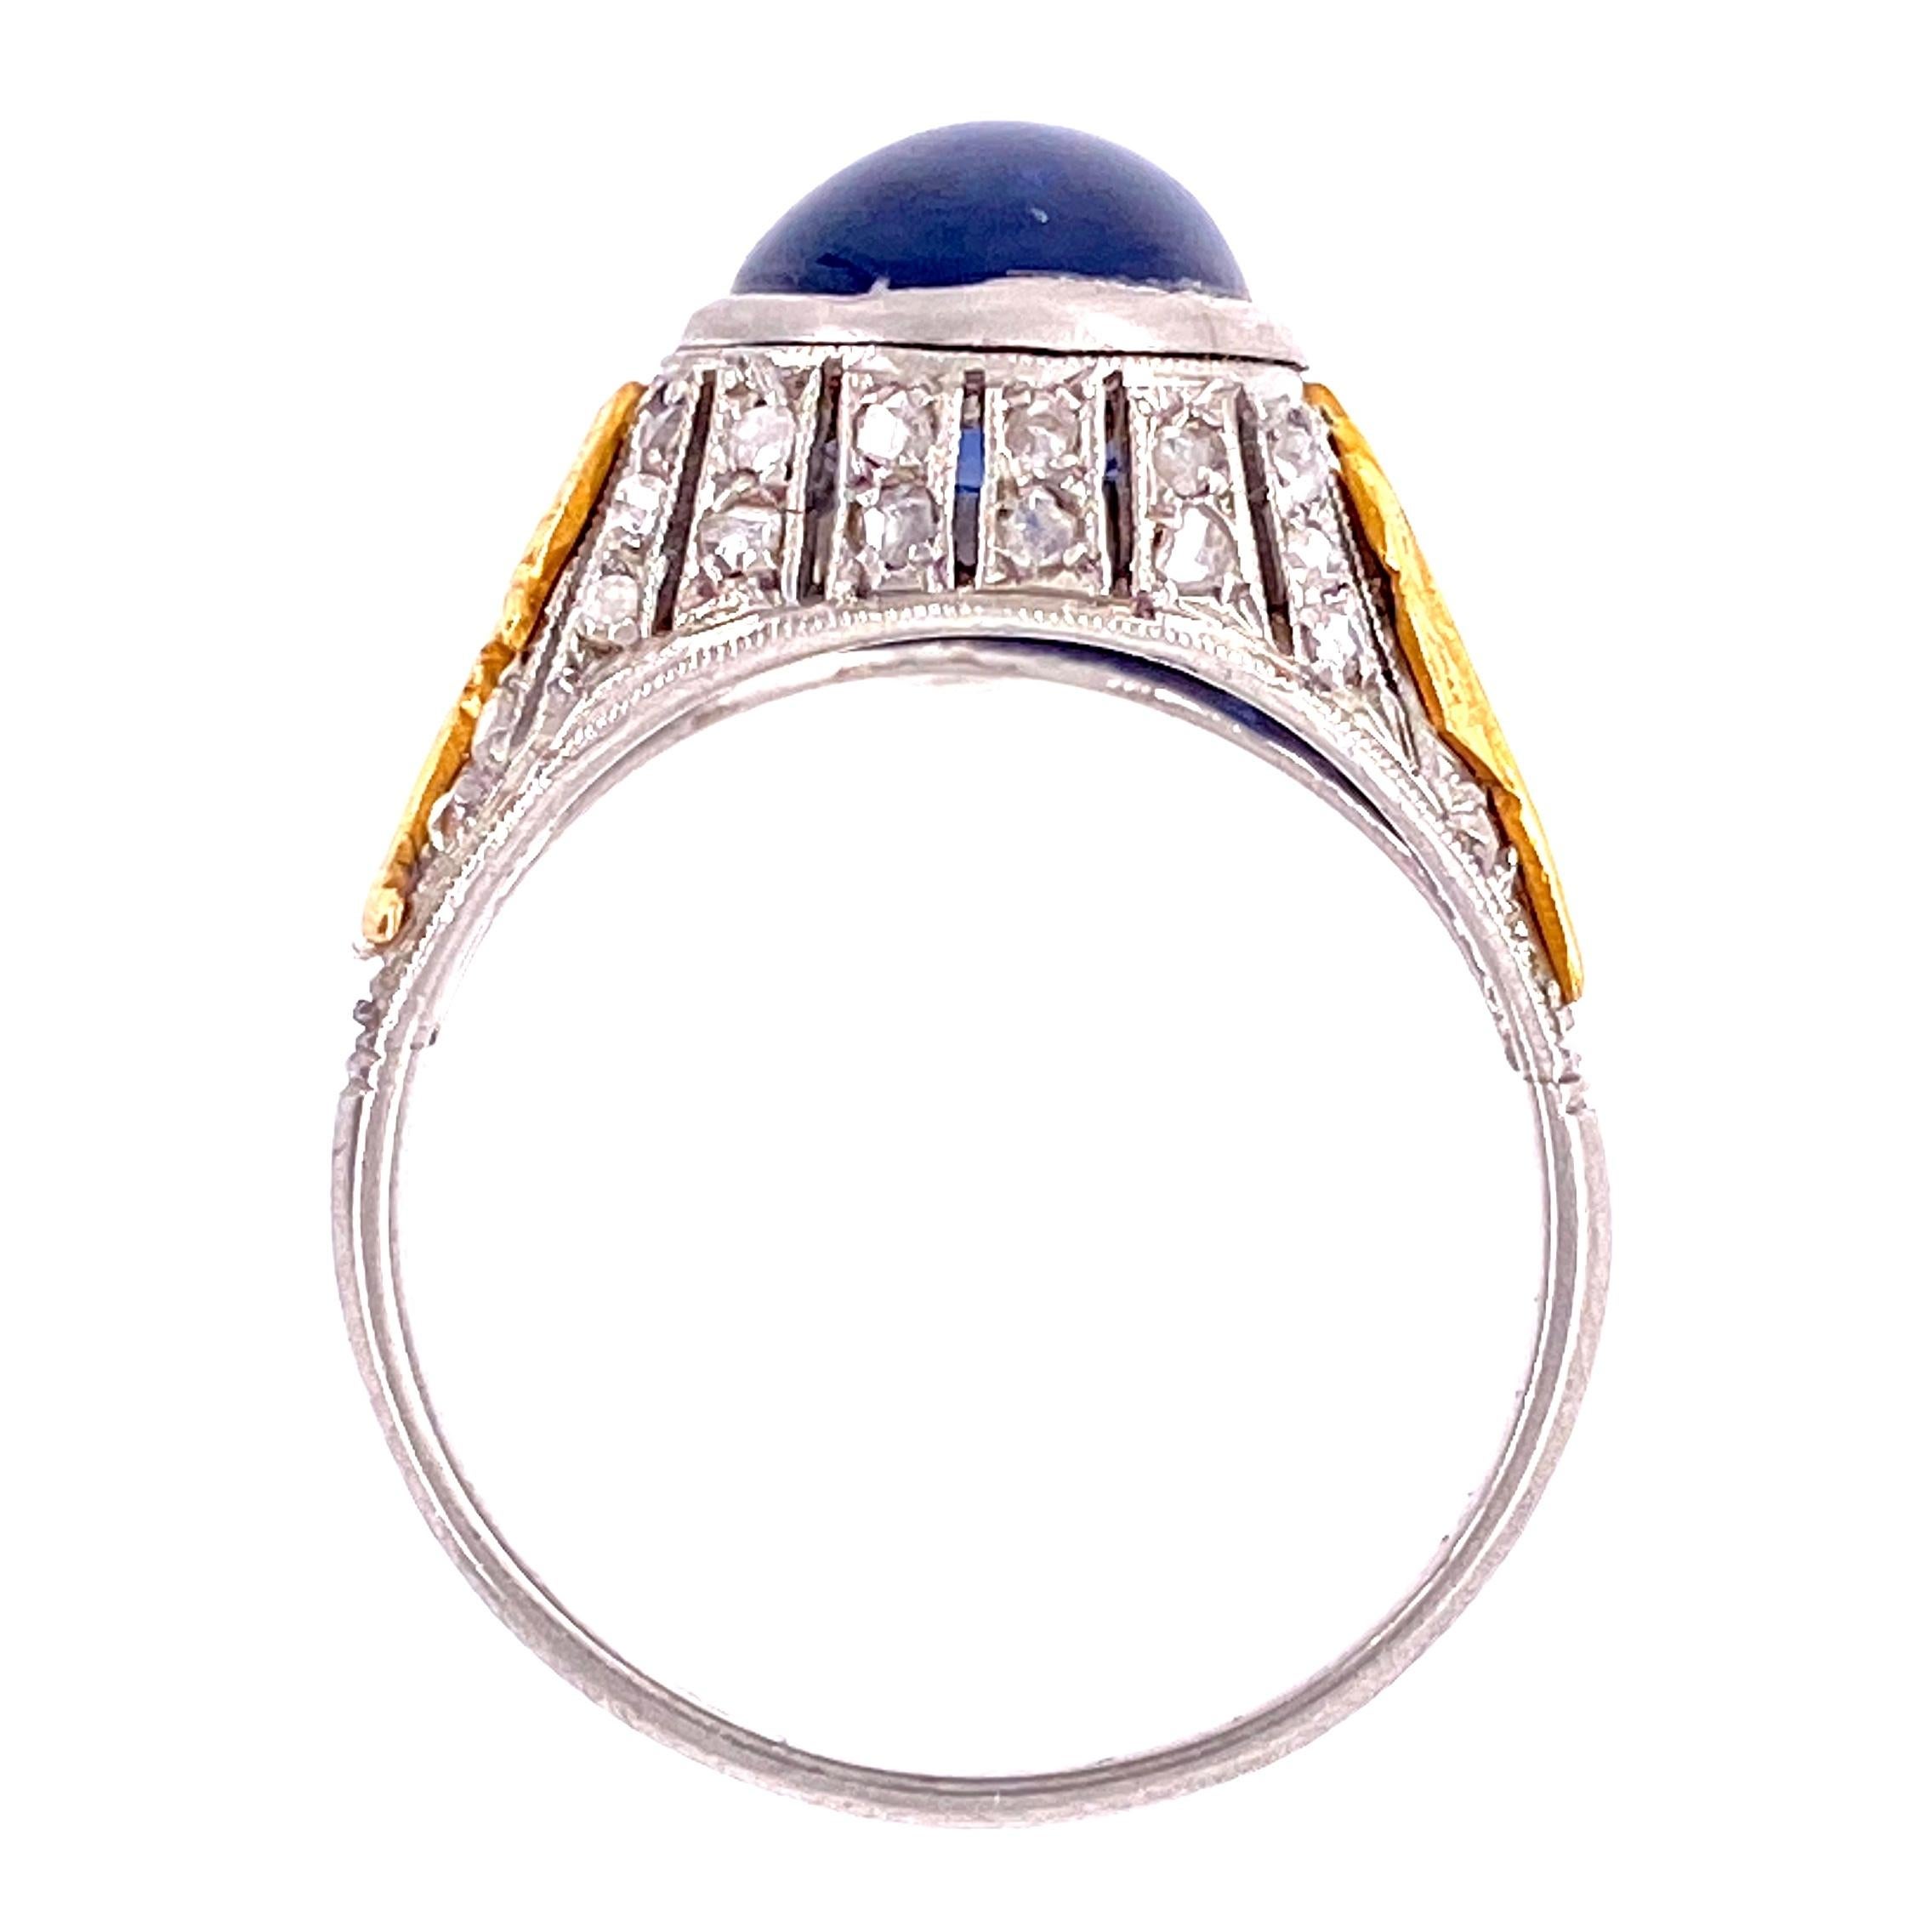 Sapphire and Diamond Art Deco Revival Platinum Ring Fine Estate Jewelry In Excellent Condition For Sale In Montreal, QC